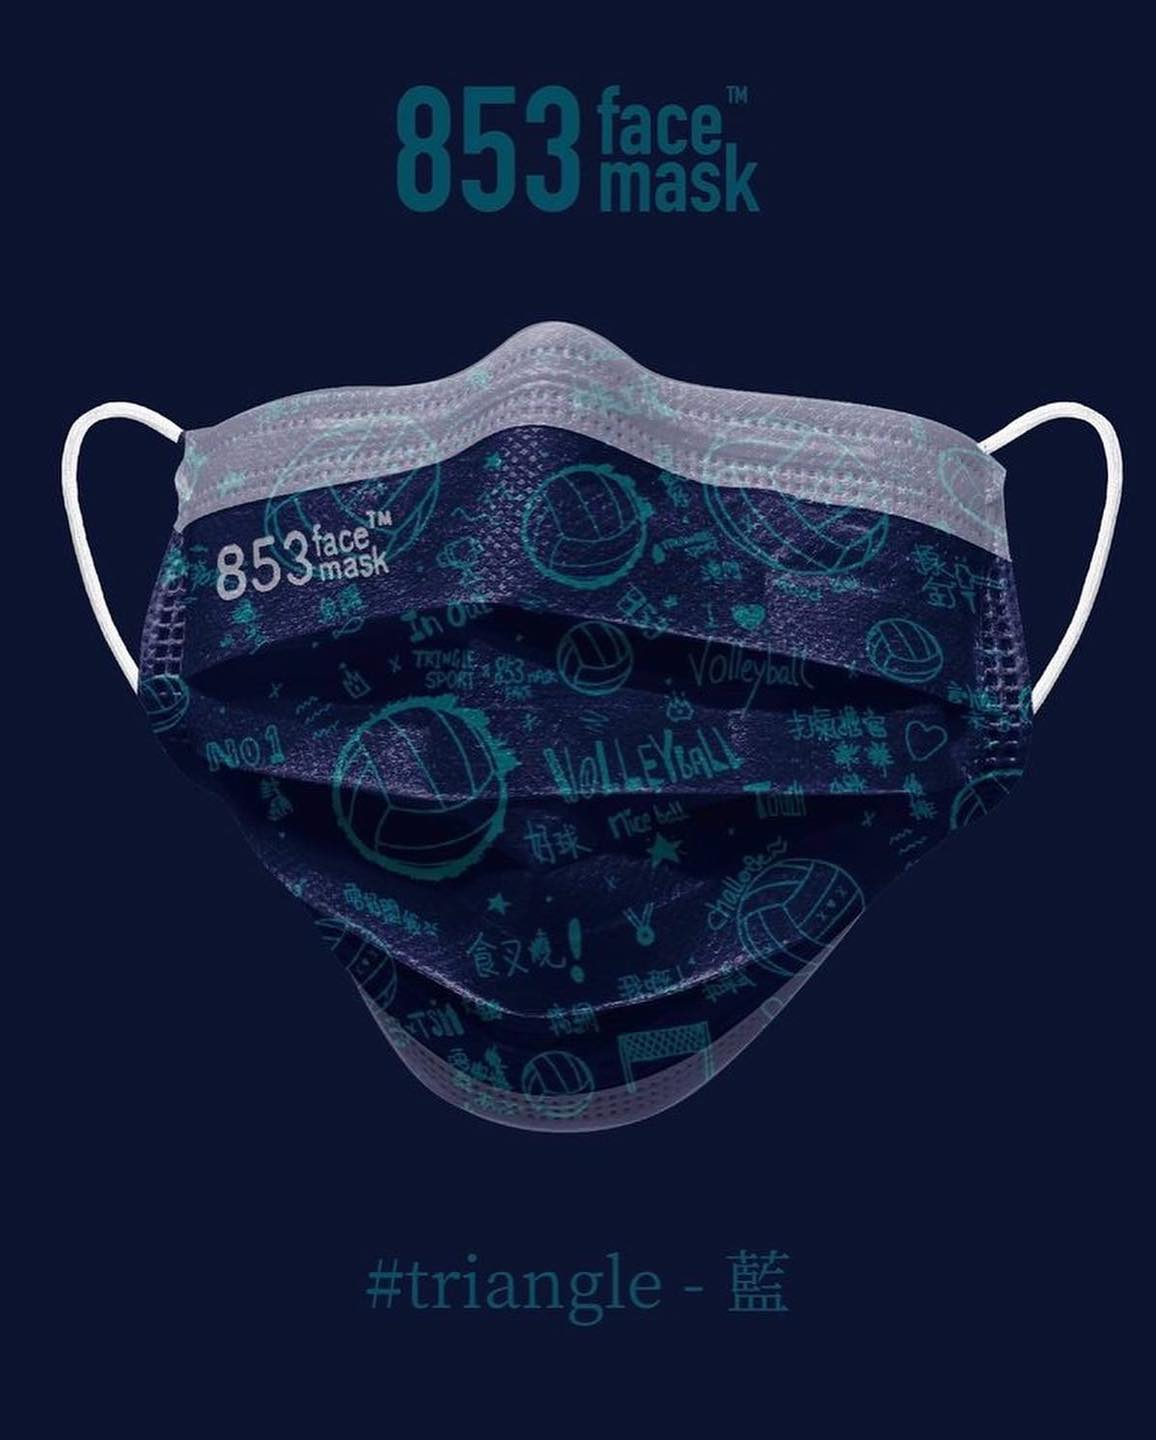 ASTM Level 3 口罩（853 Face Mask™️x TRIANGLE Sport 藍）非獨立包裝10片